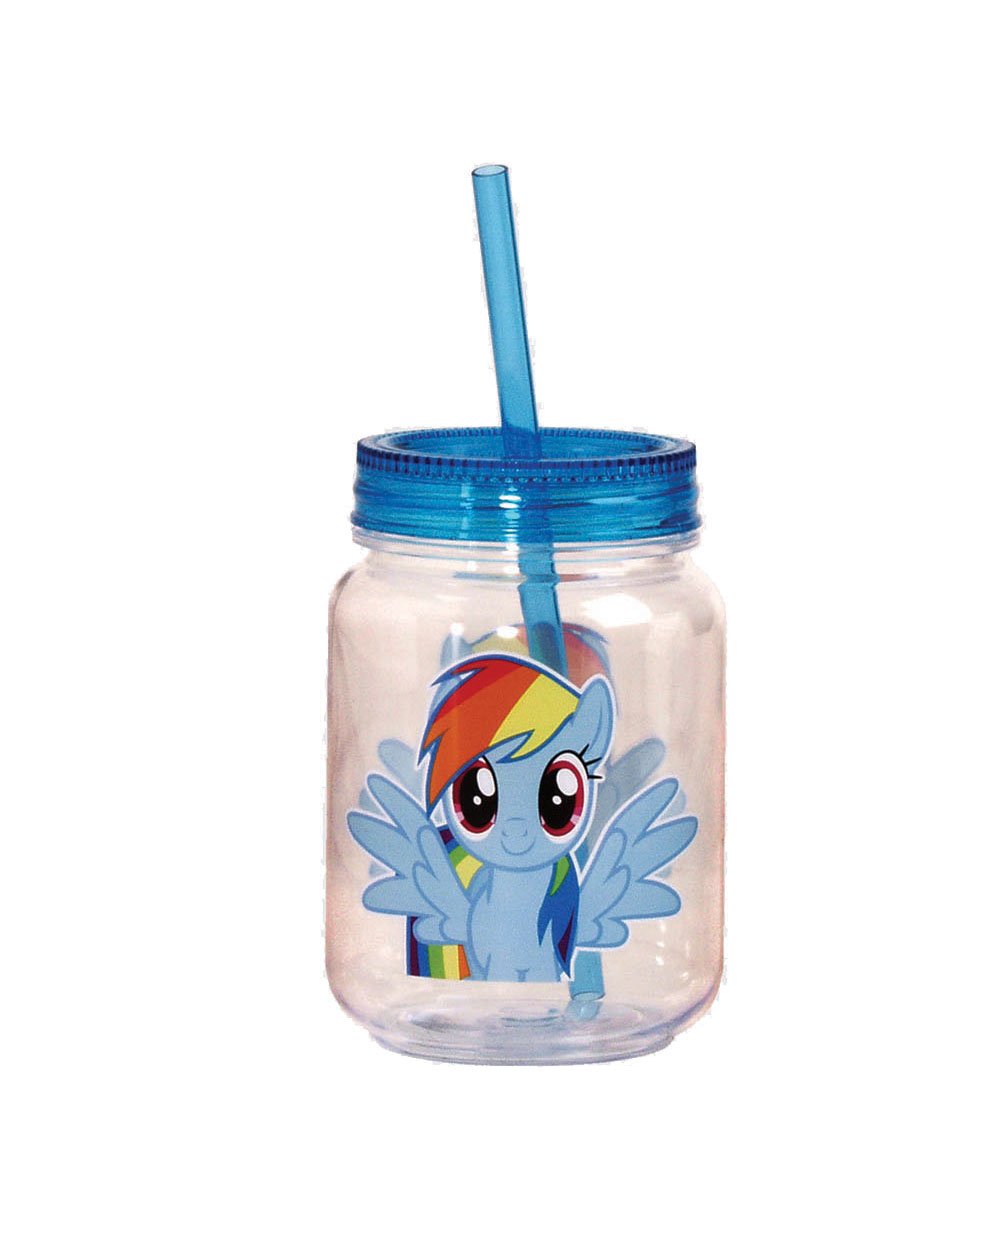 cara murrell recommends What Is The Rainbow Dash Jar